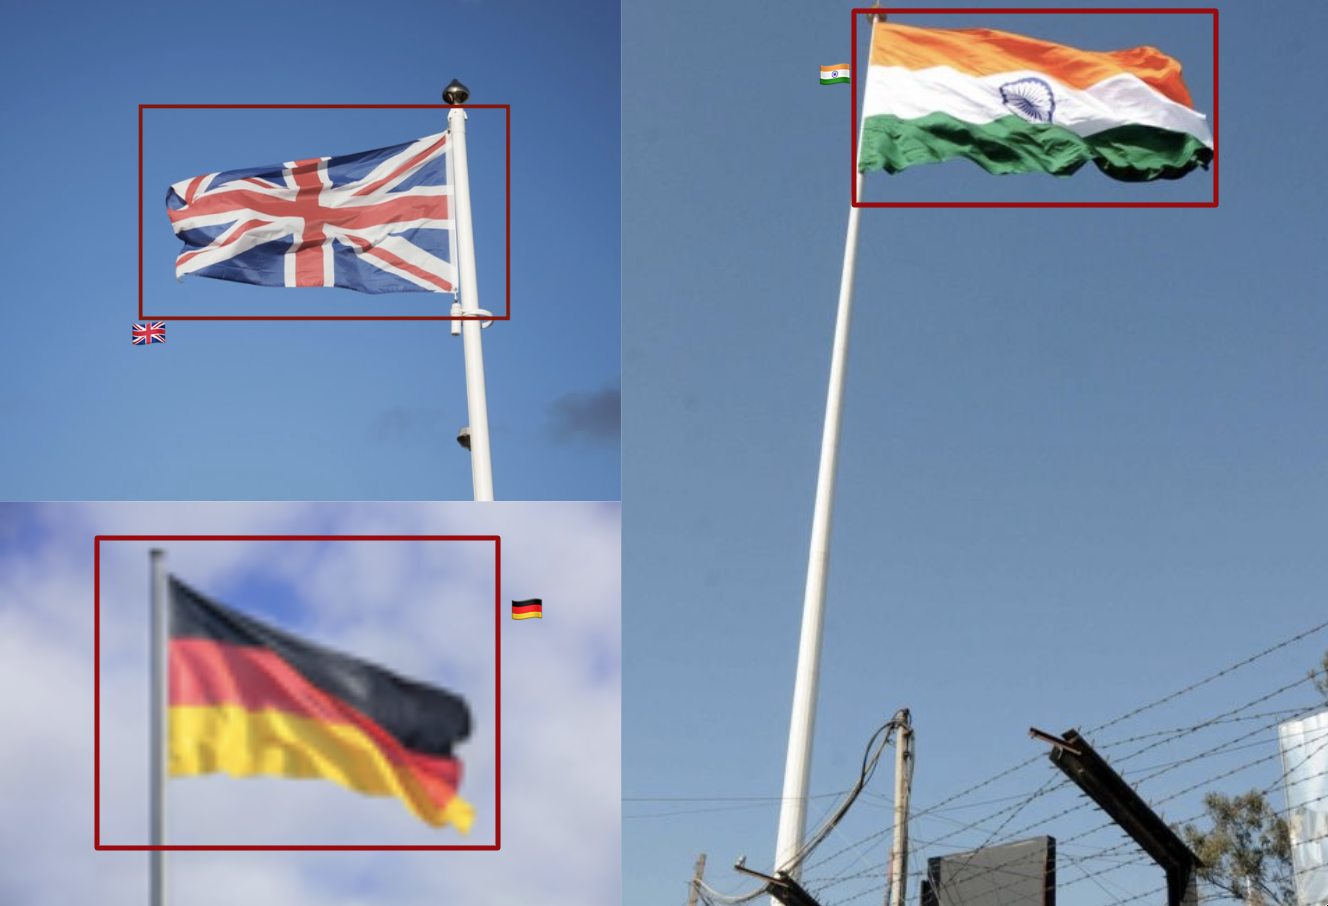 A Nearest Network classifier correctly matches the national flags of India, the United Kingdom, and Germany with the appropriate emojis